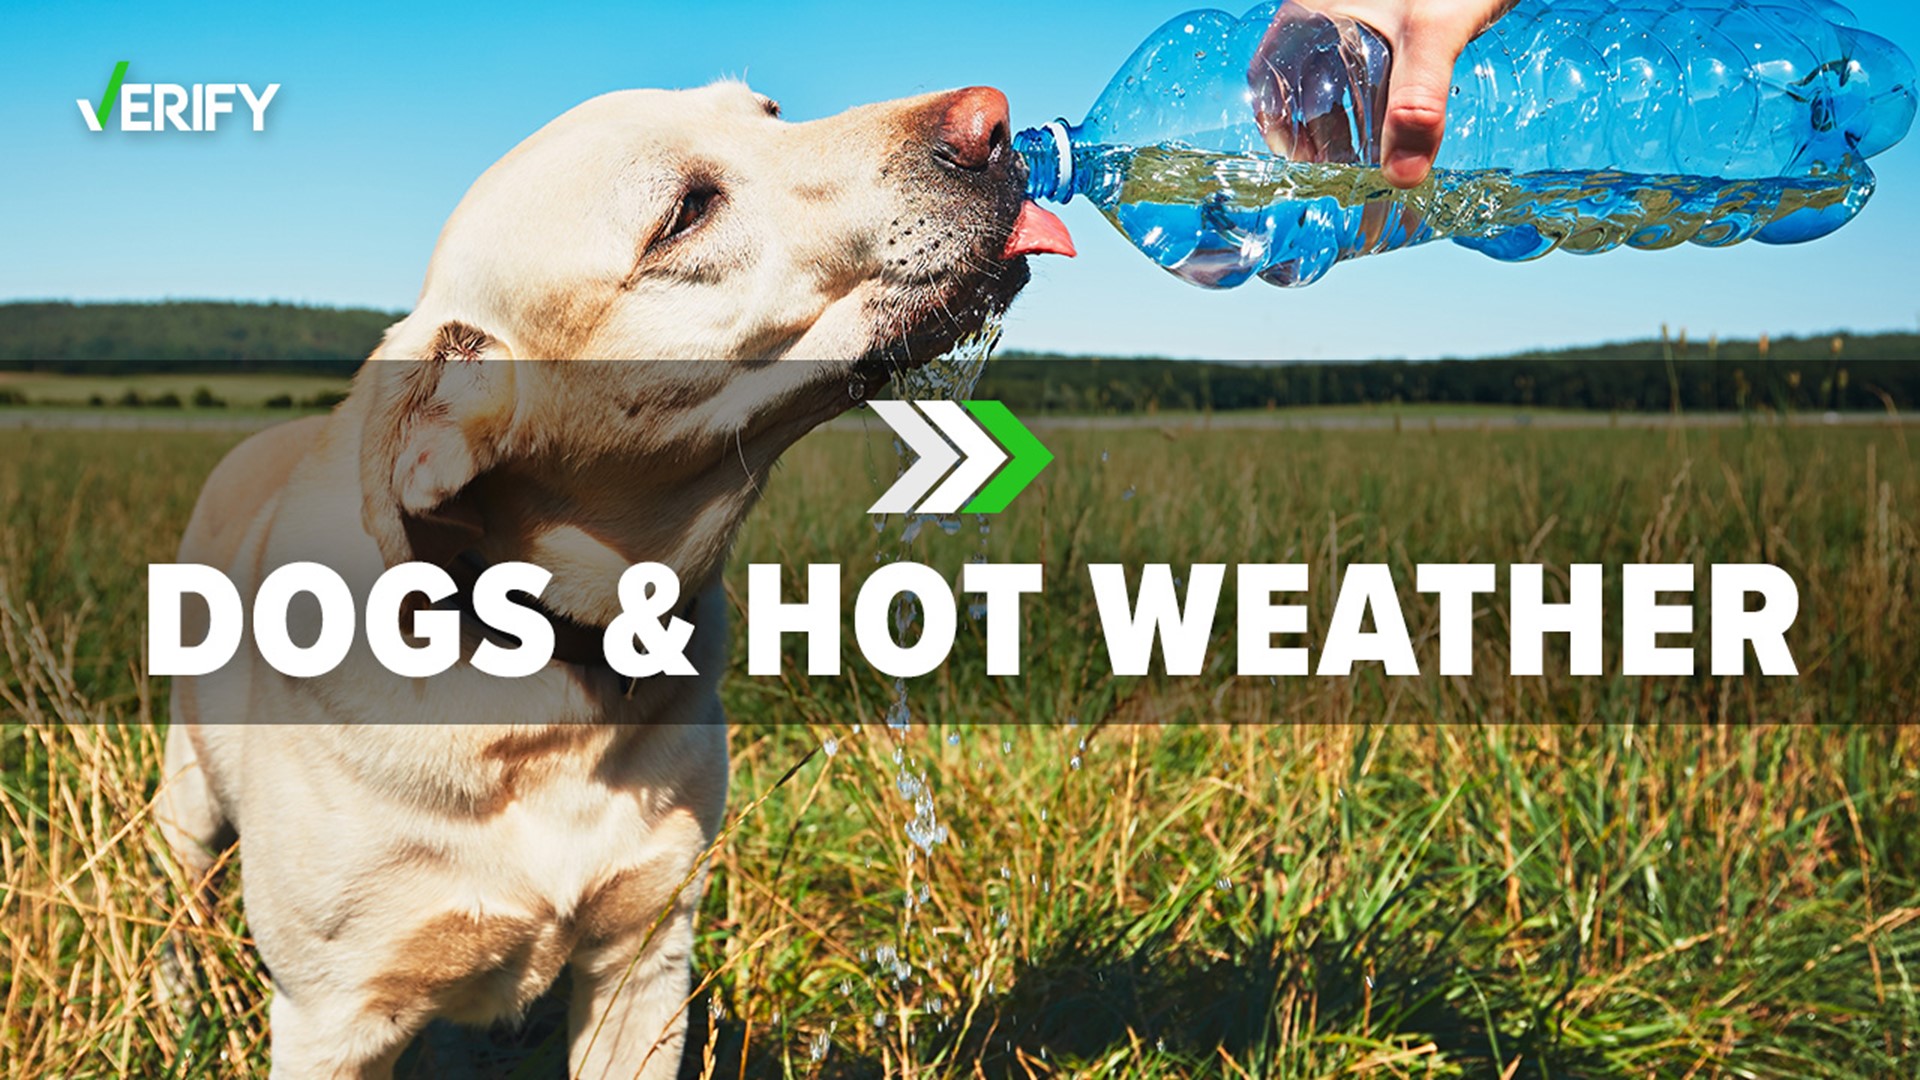 Did you know dogs are terrible at sweating? The primary way they keep cool is through panting. Here are more facts and tips to help your canine manage the heat.